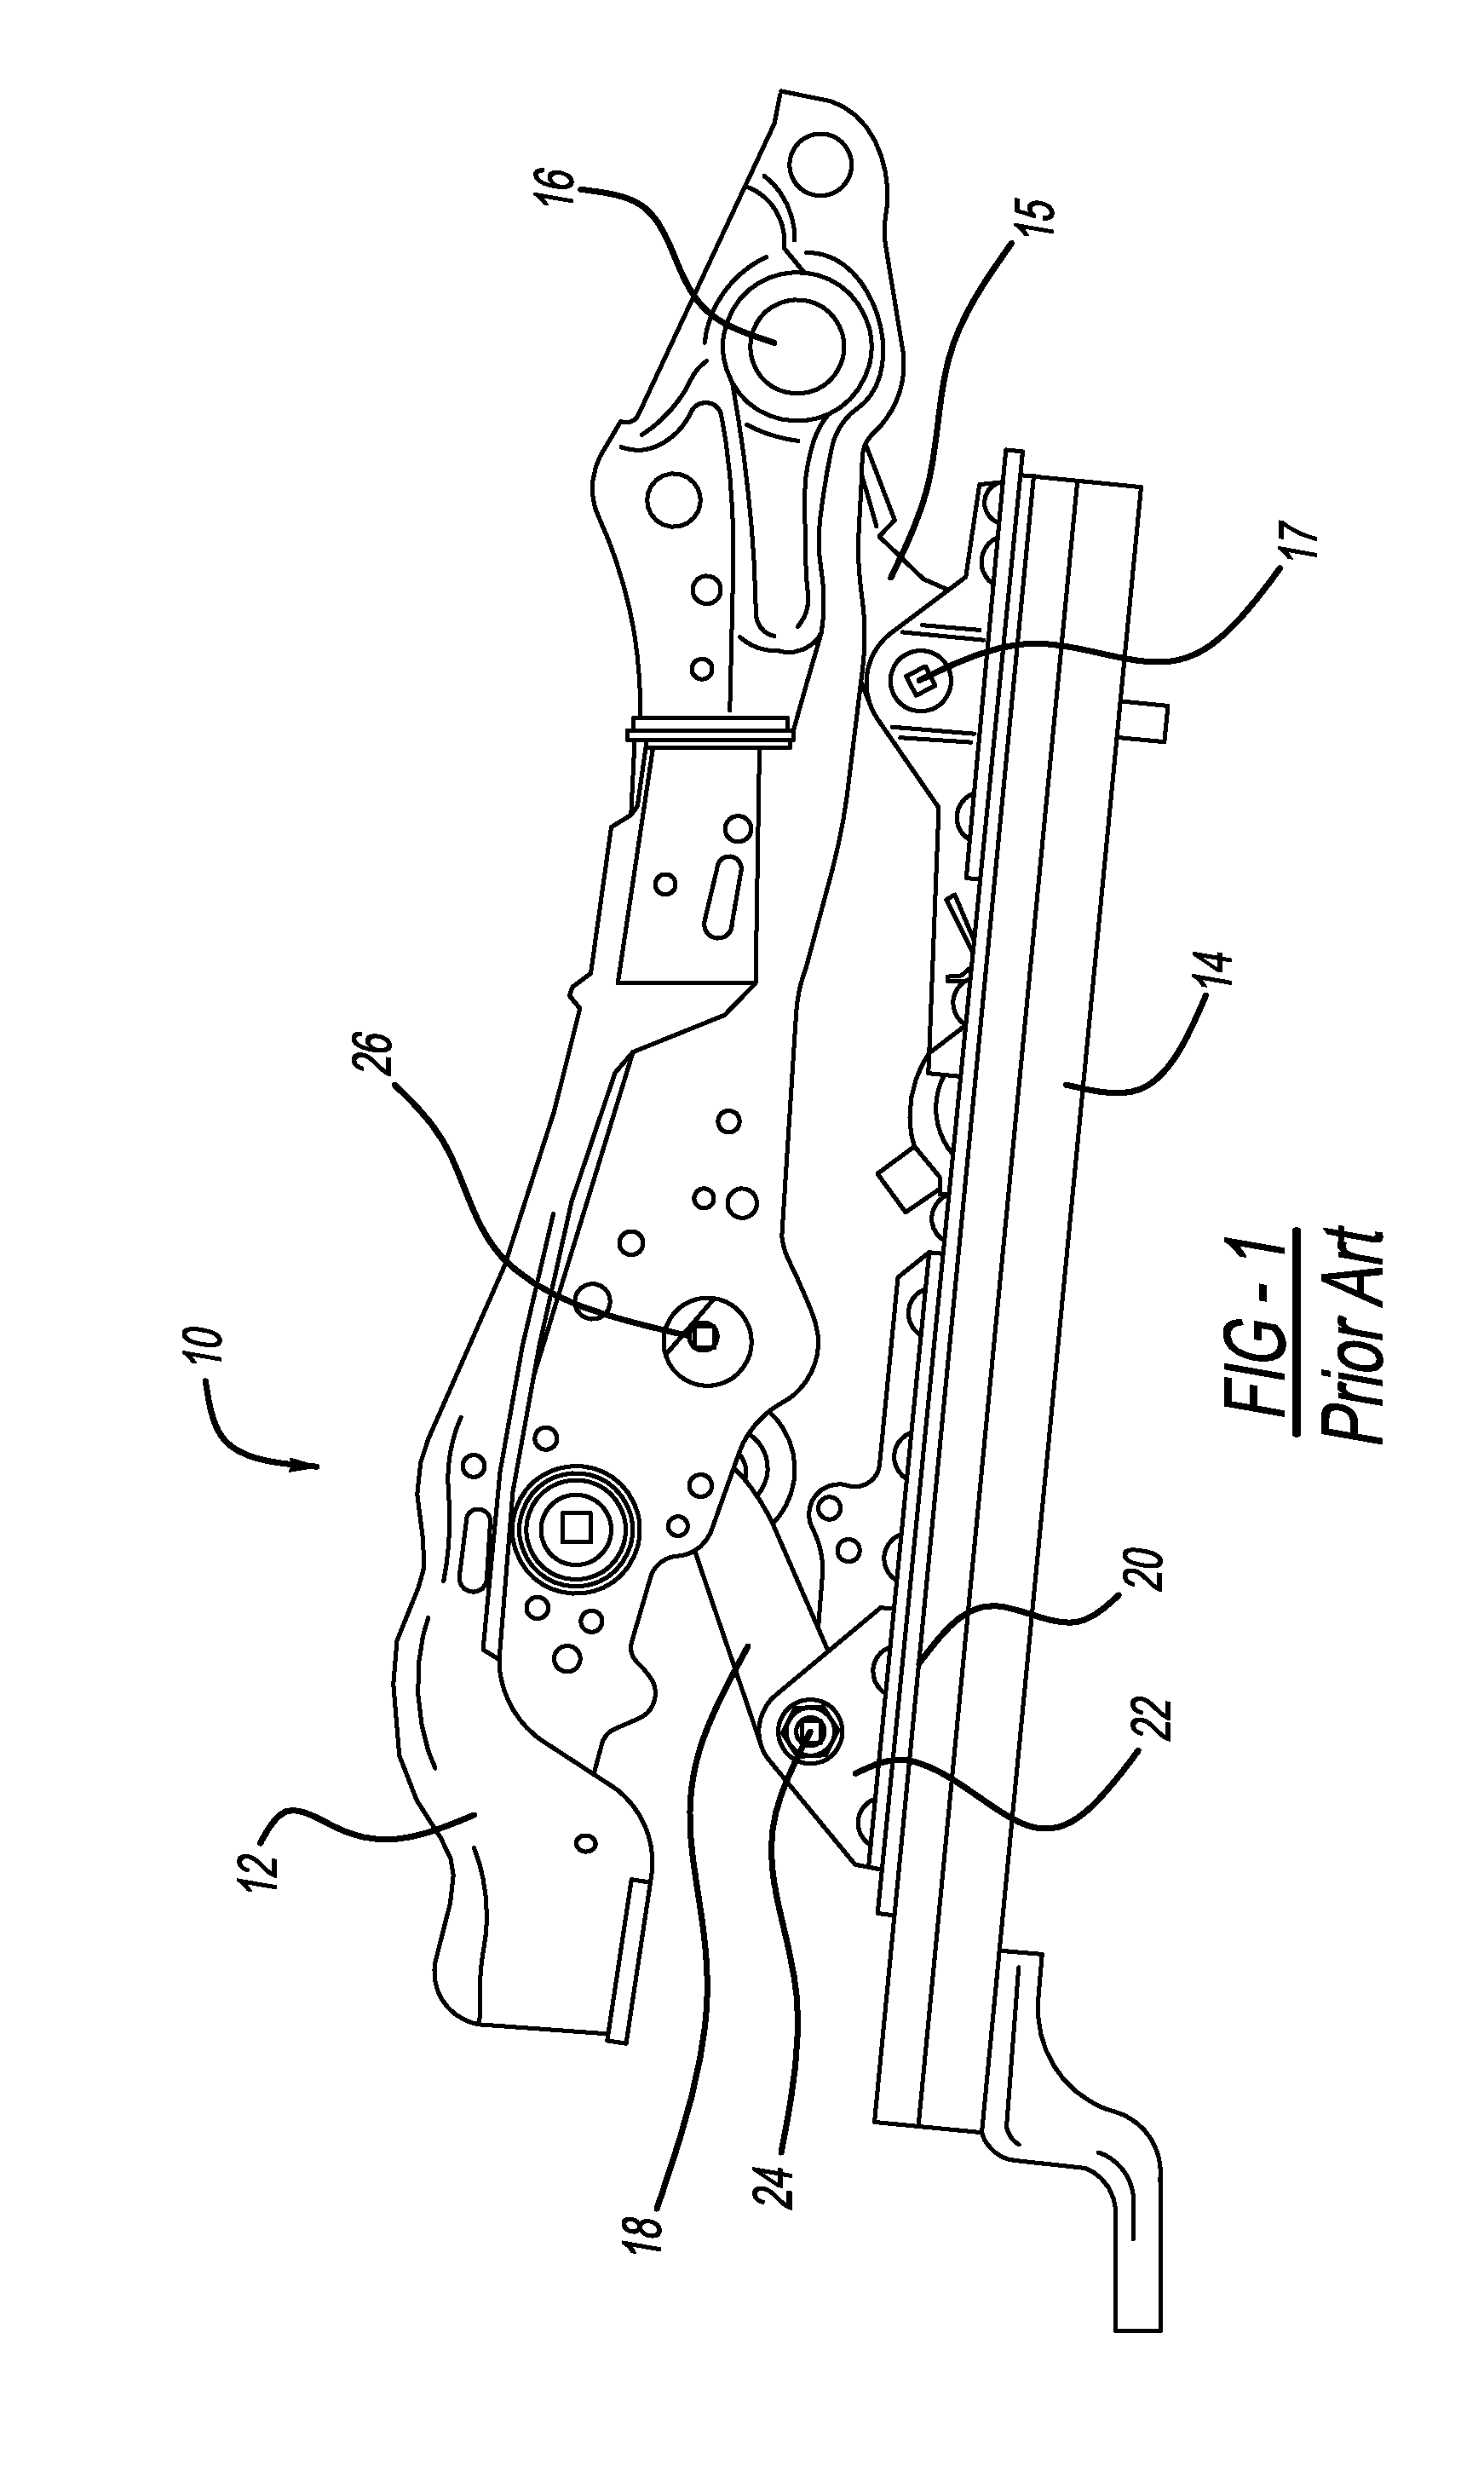 Pyrotechnic fastener seat arrangement for unbelted occupant protection